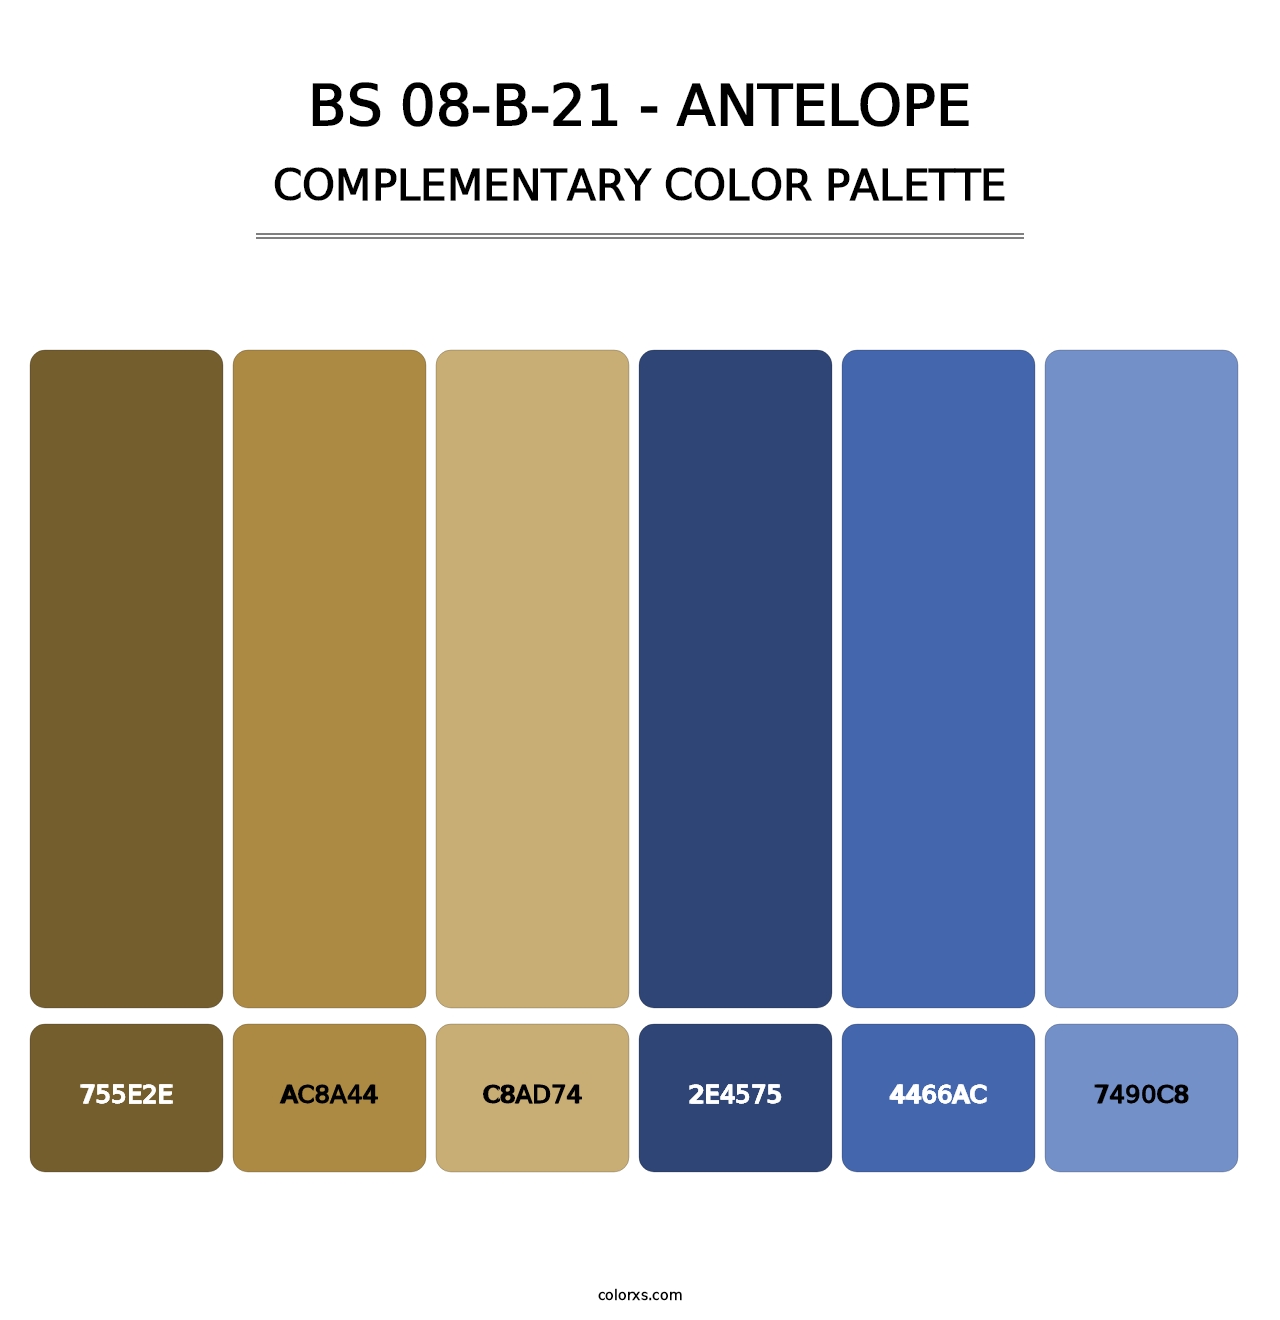 BS 08-B-21 - Antelope - Complementary Color Palette